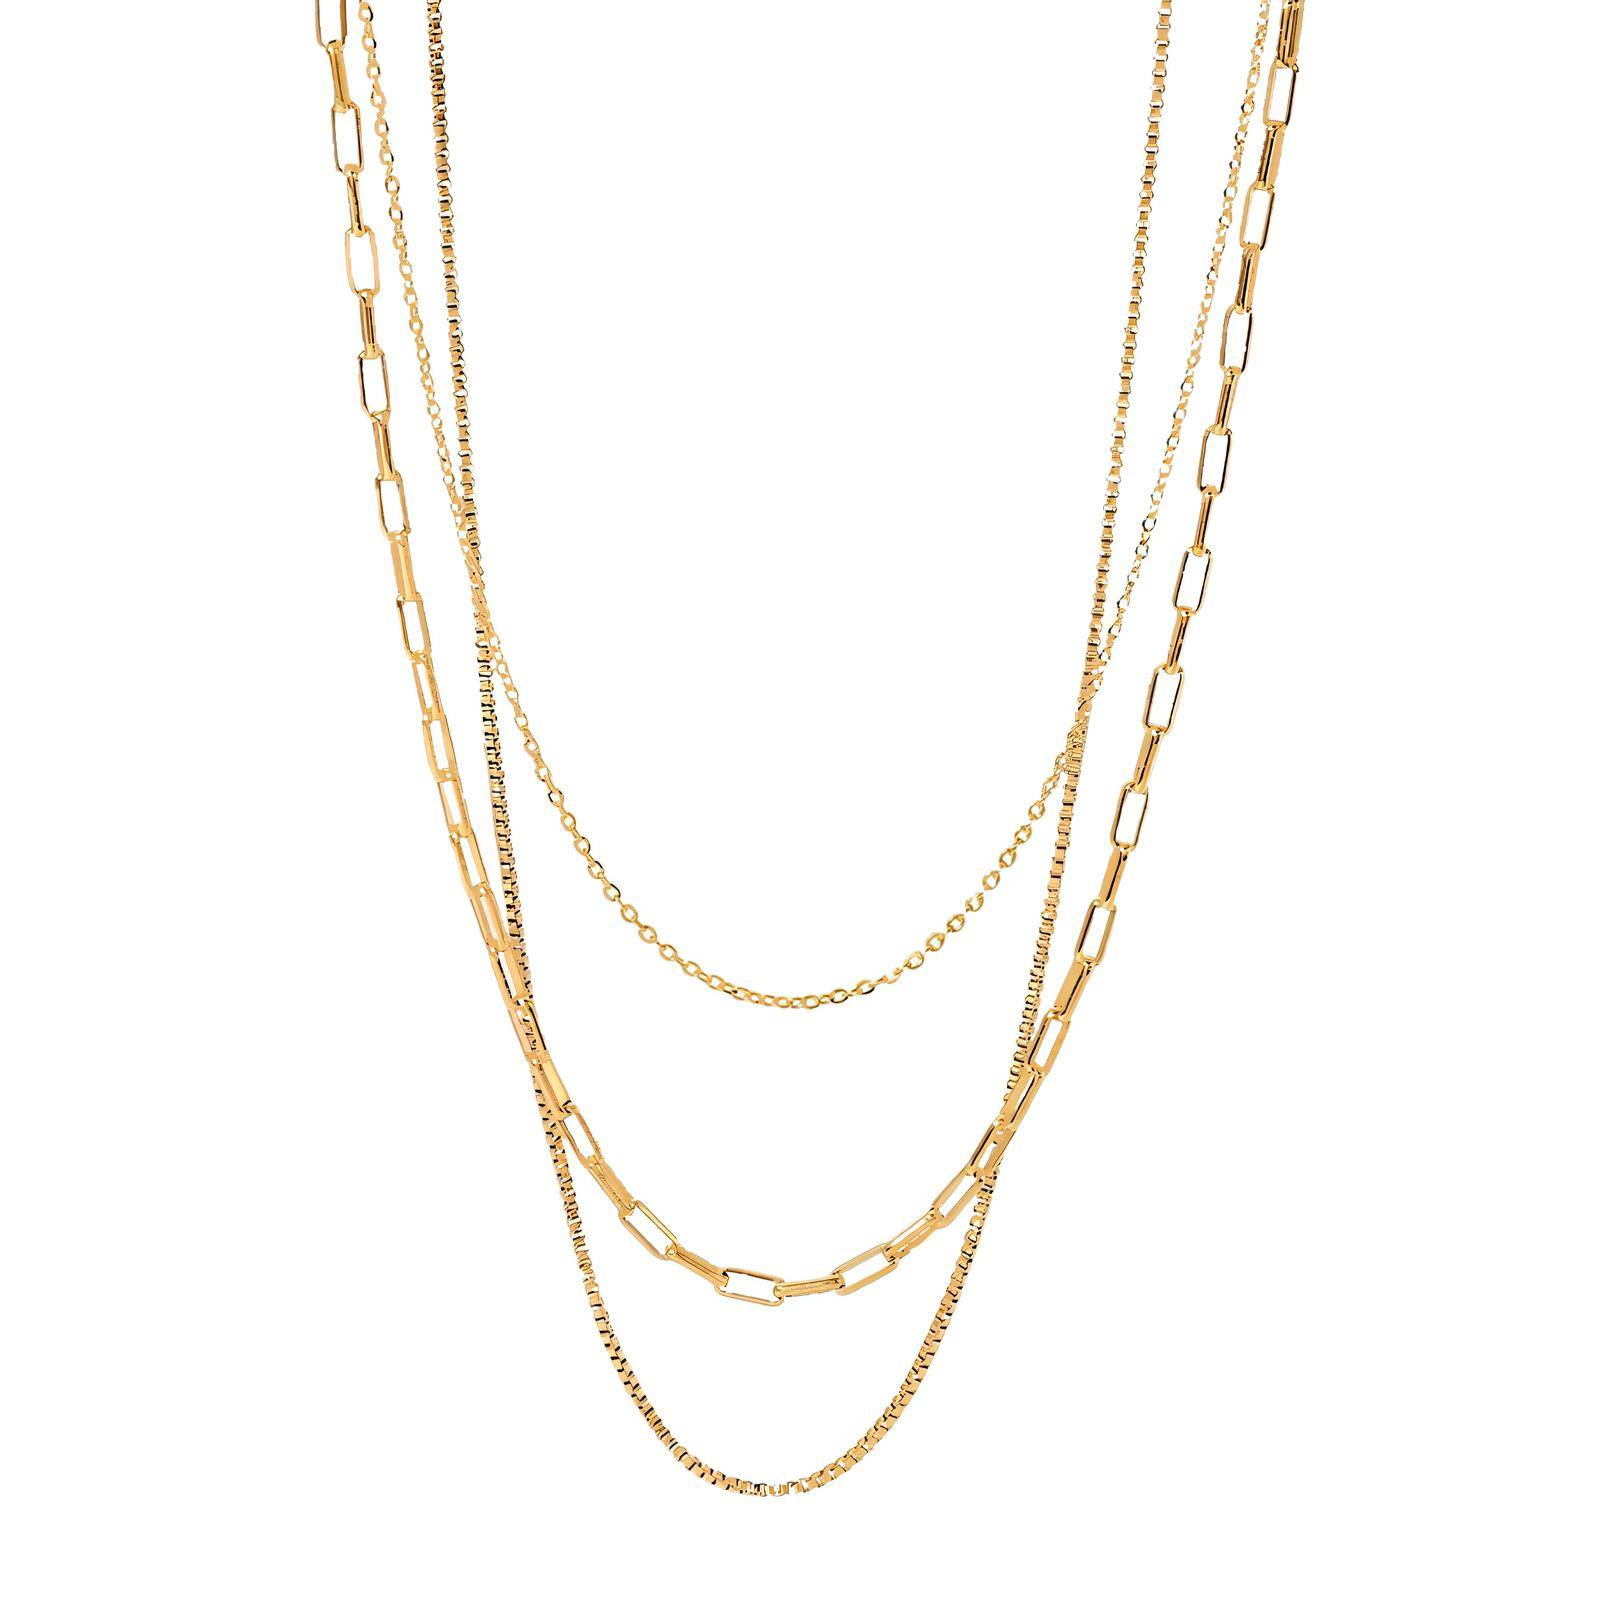 18K gold plated Stainless steel necklace, Intensity SKU #84825-111 ...